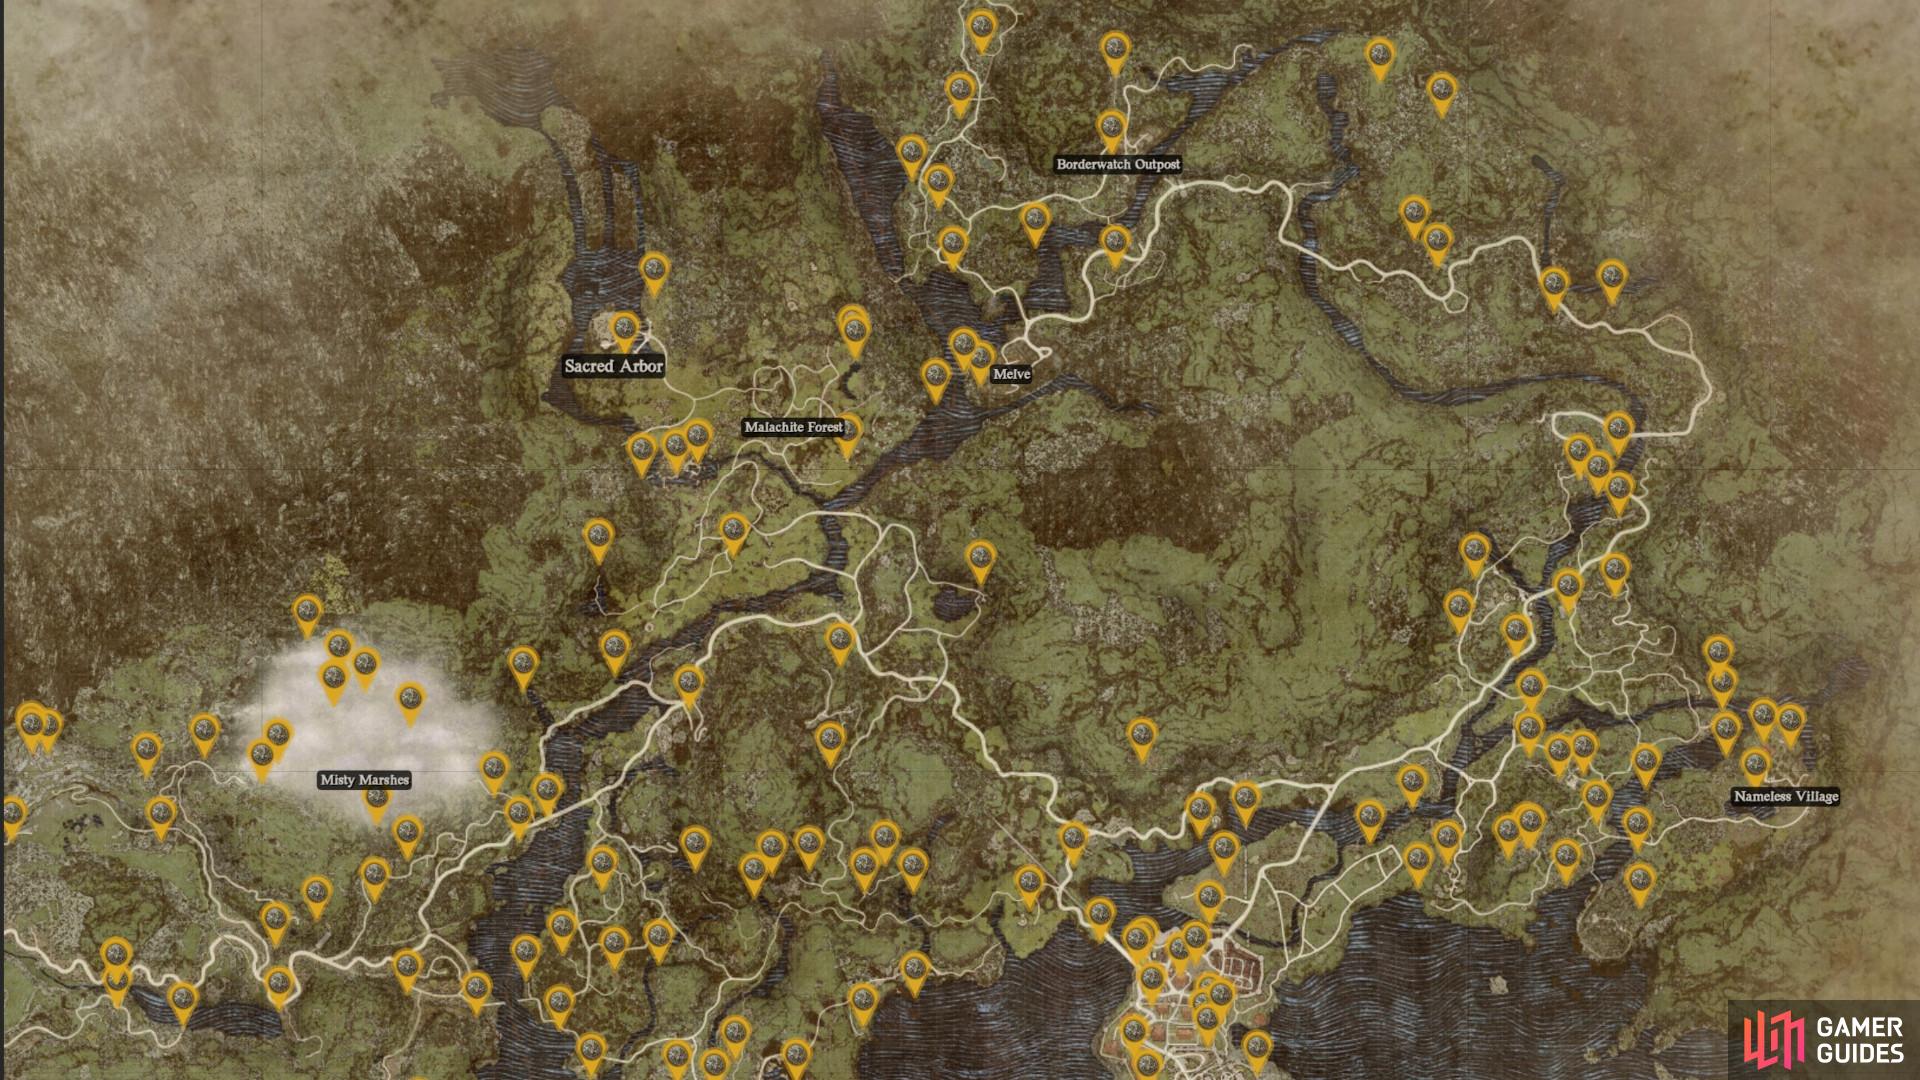 This map will assist you with finding all Seeker’s Tokens in Dragon’s Dogma 2.